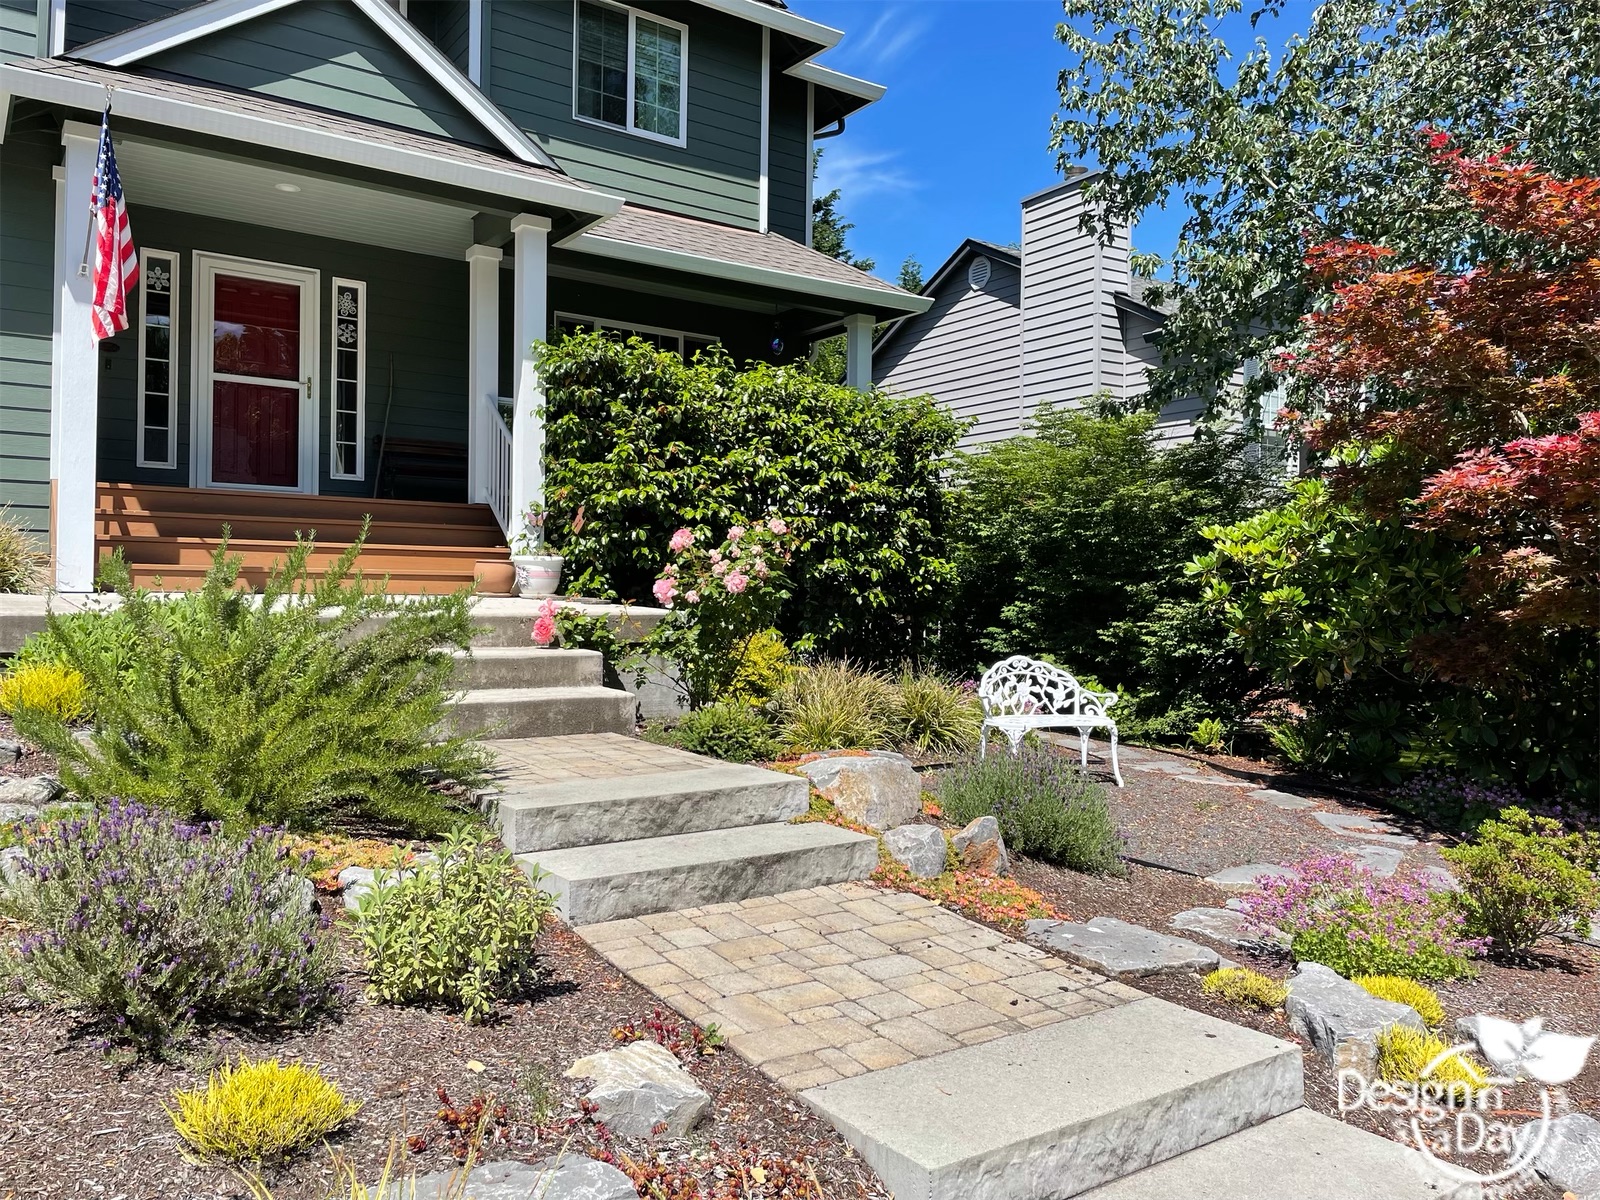 No Grass Front Yard Archives, How To Landscape A Small Front Yard Without Grass